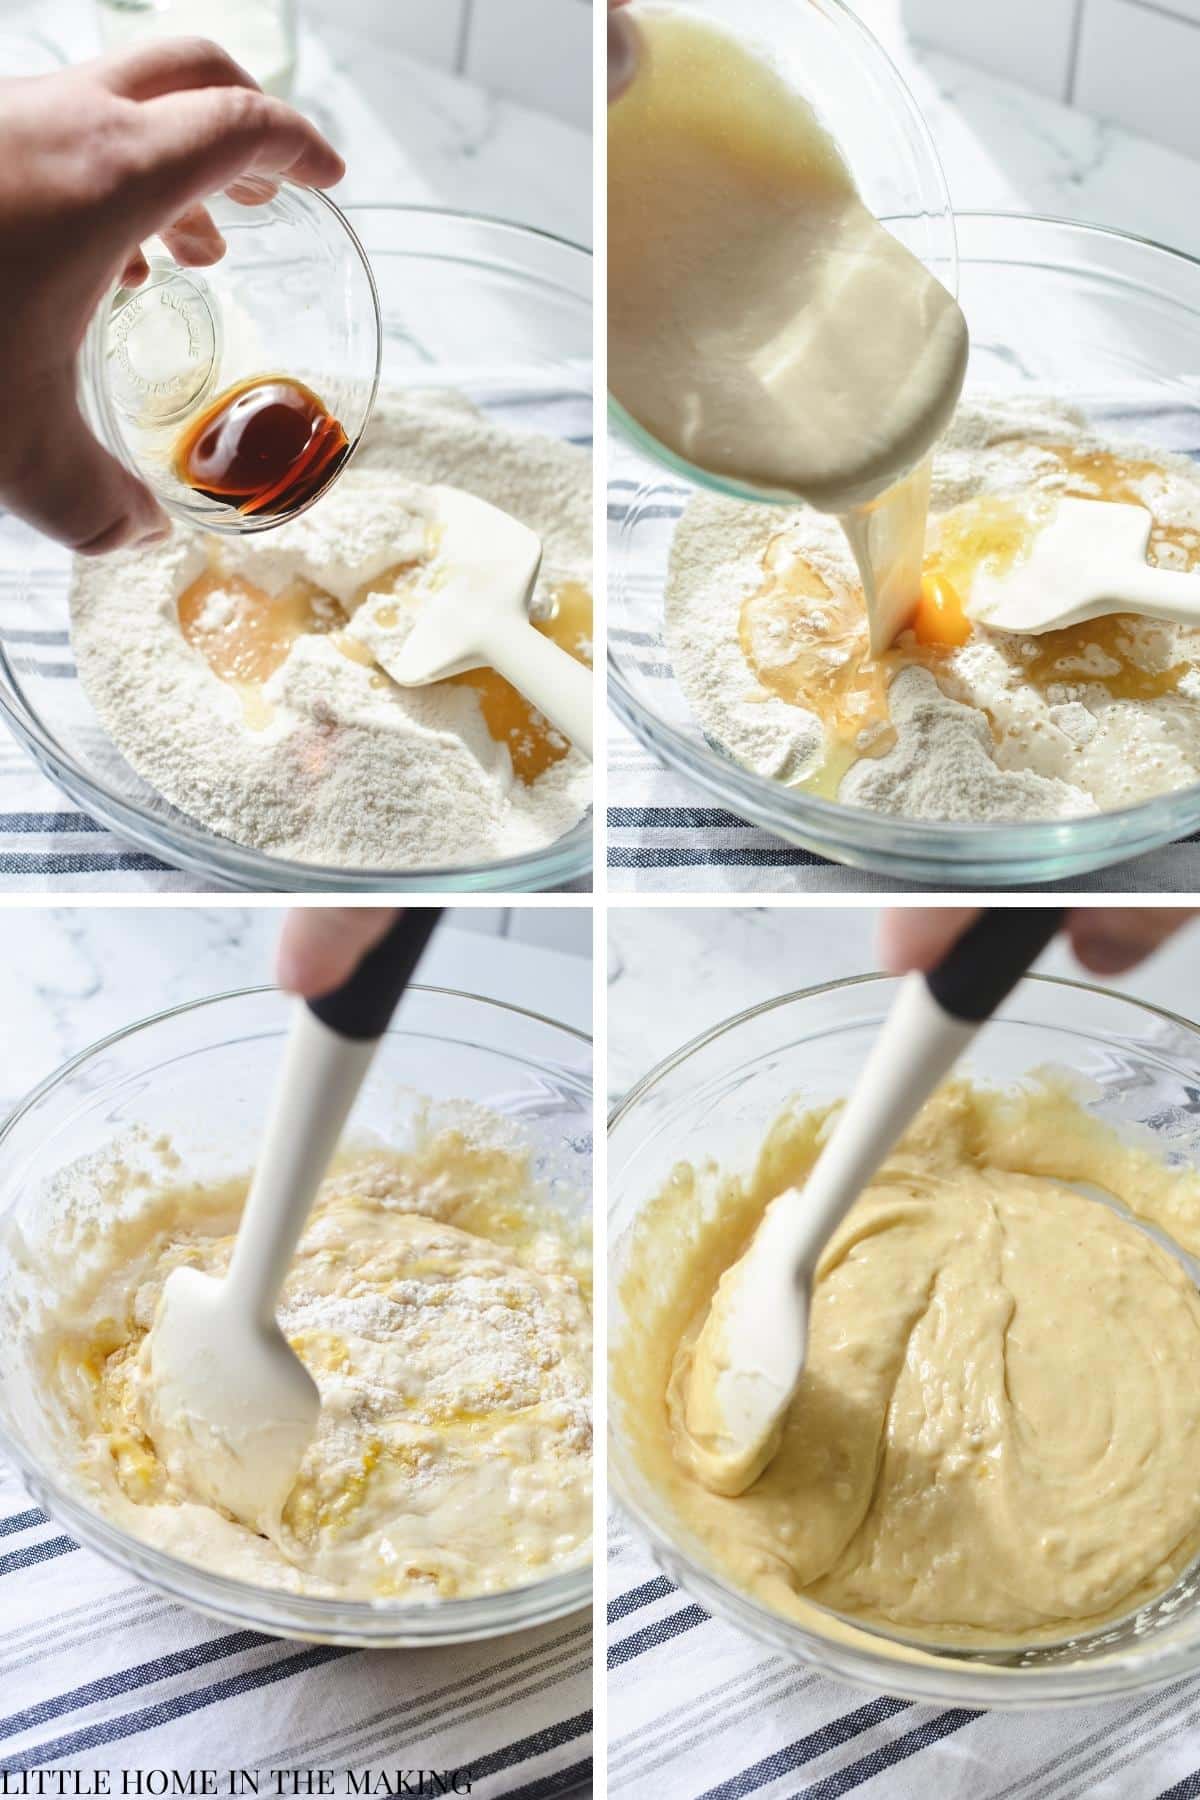 Adding wet ingredients and mixing up a batter.